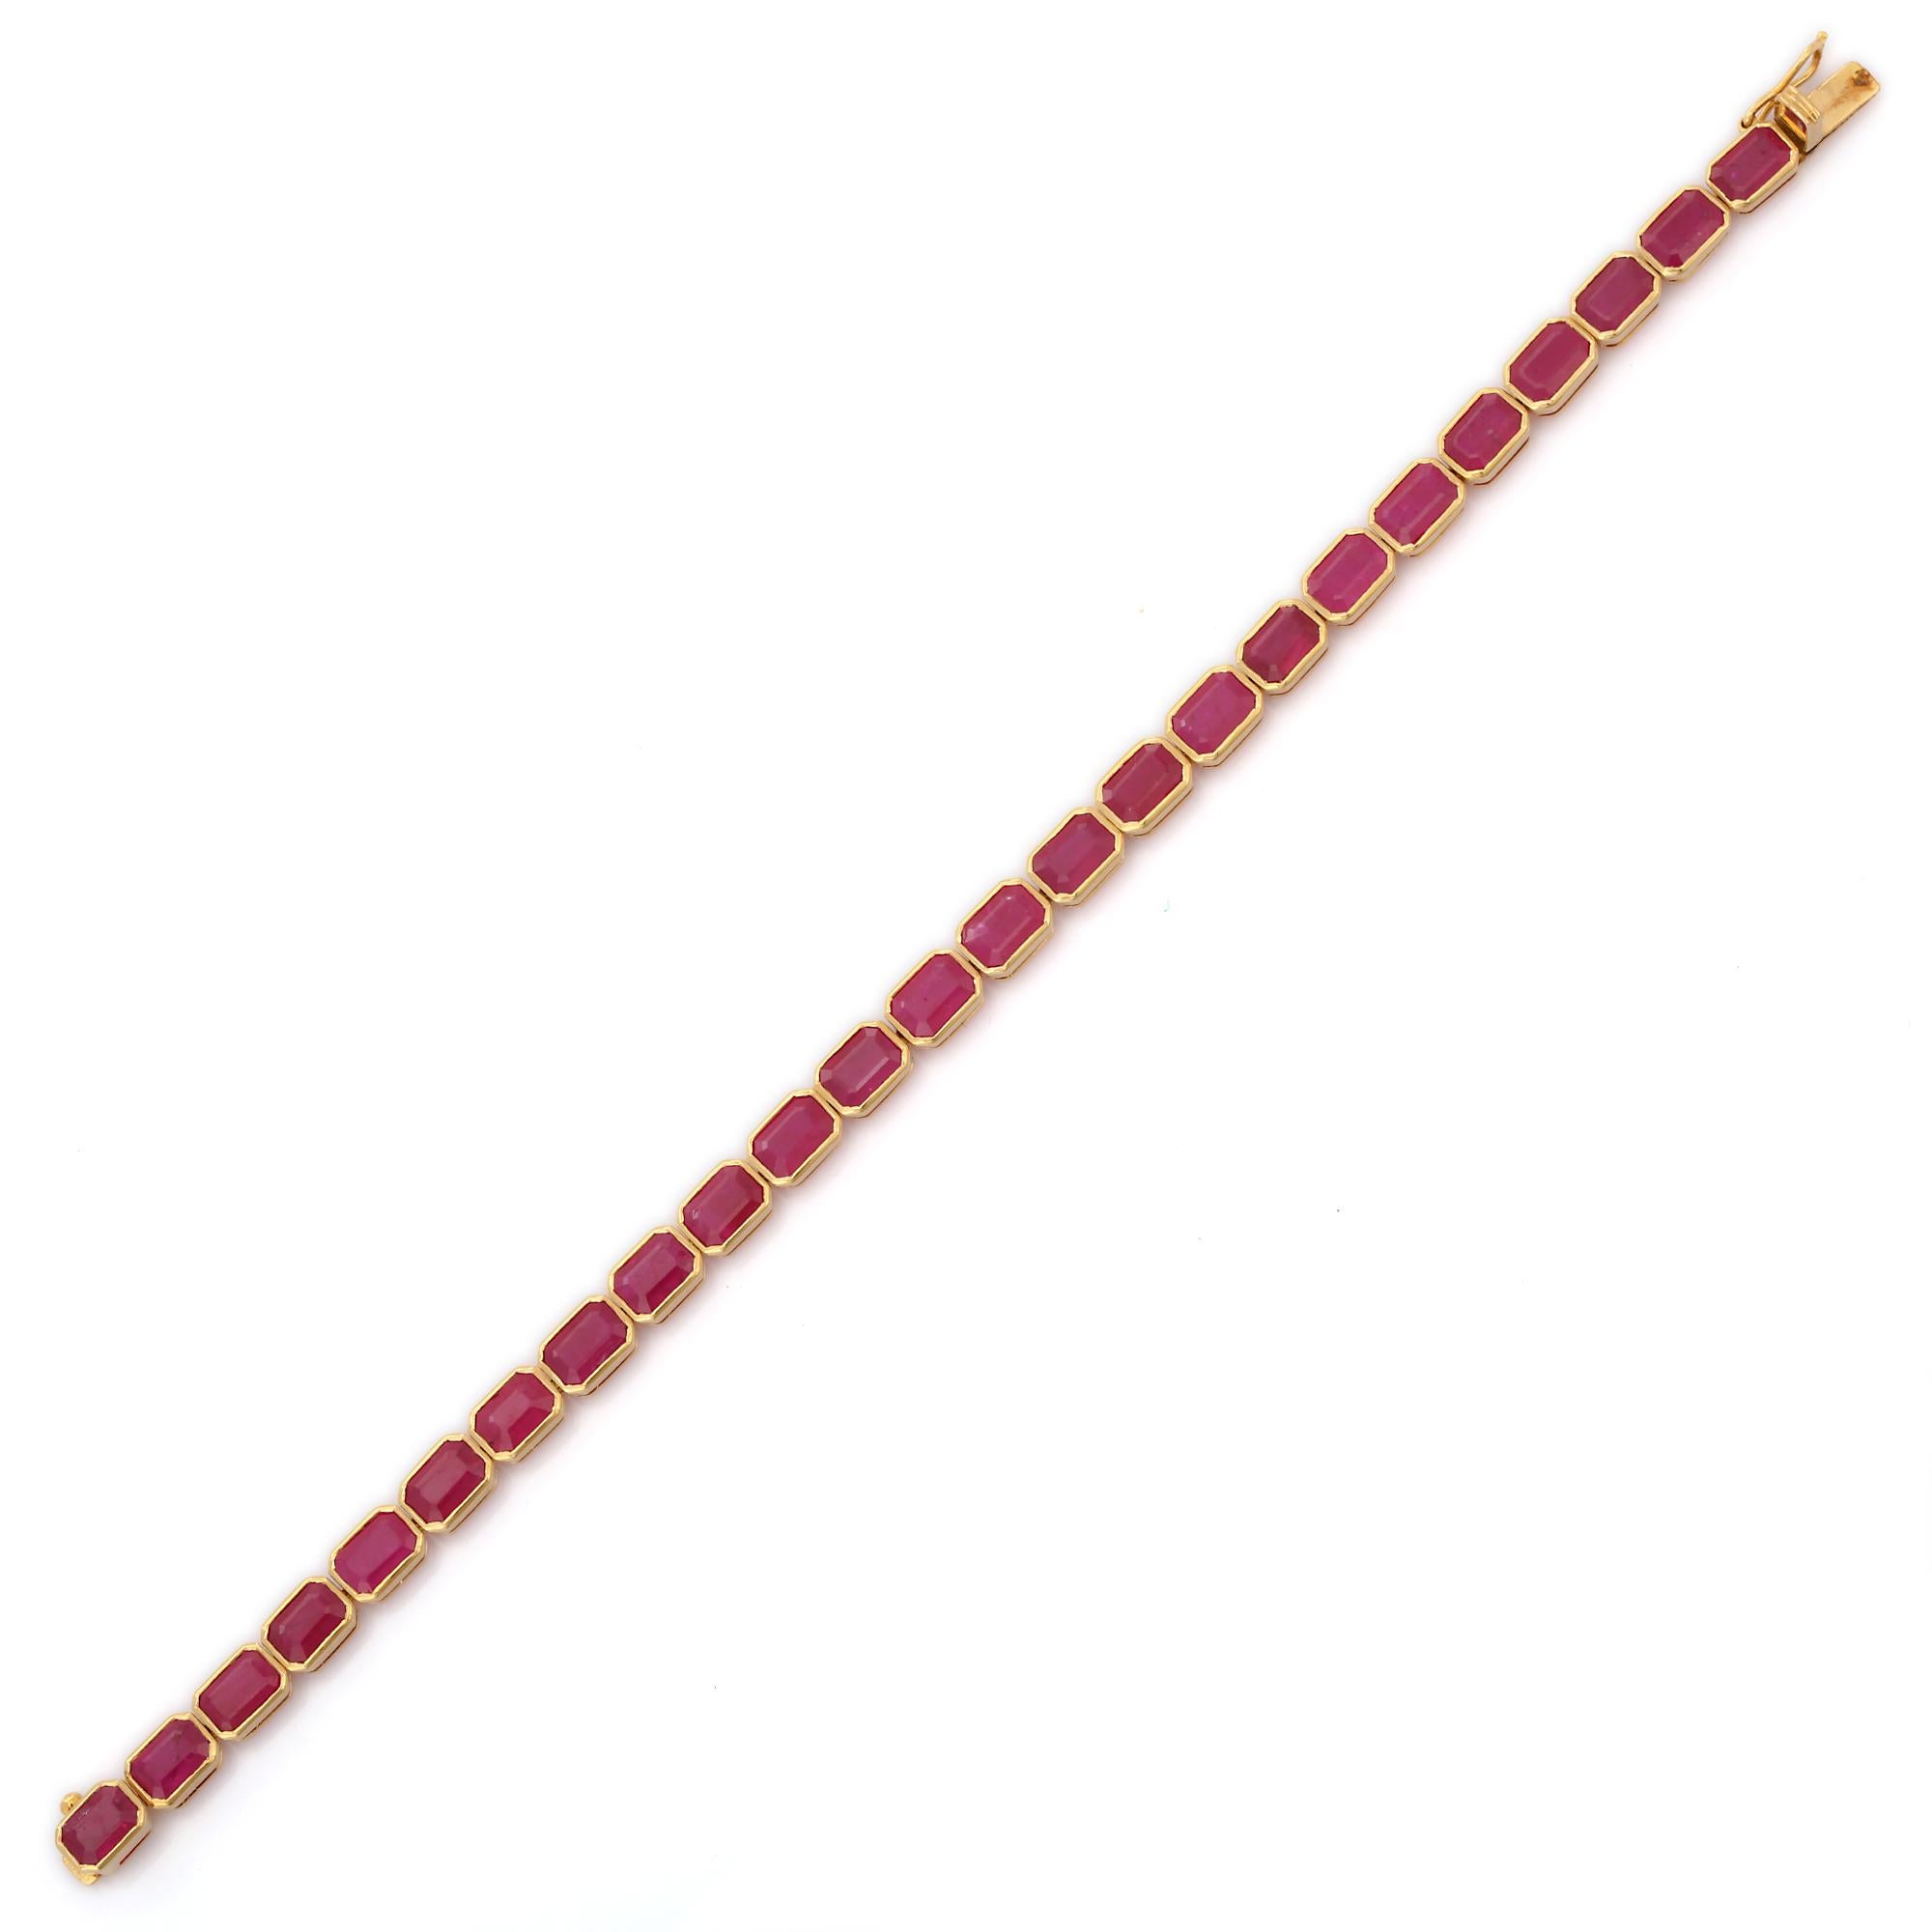 Ruby tennis bracelet in 18K Gold. It has a perfect octagon cut gemstone to make you stand out on any occasion or an event.
A tennis bracelet is an essential piece of jewelry when it comes to your wedding day. The sleek and elegant style complements